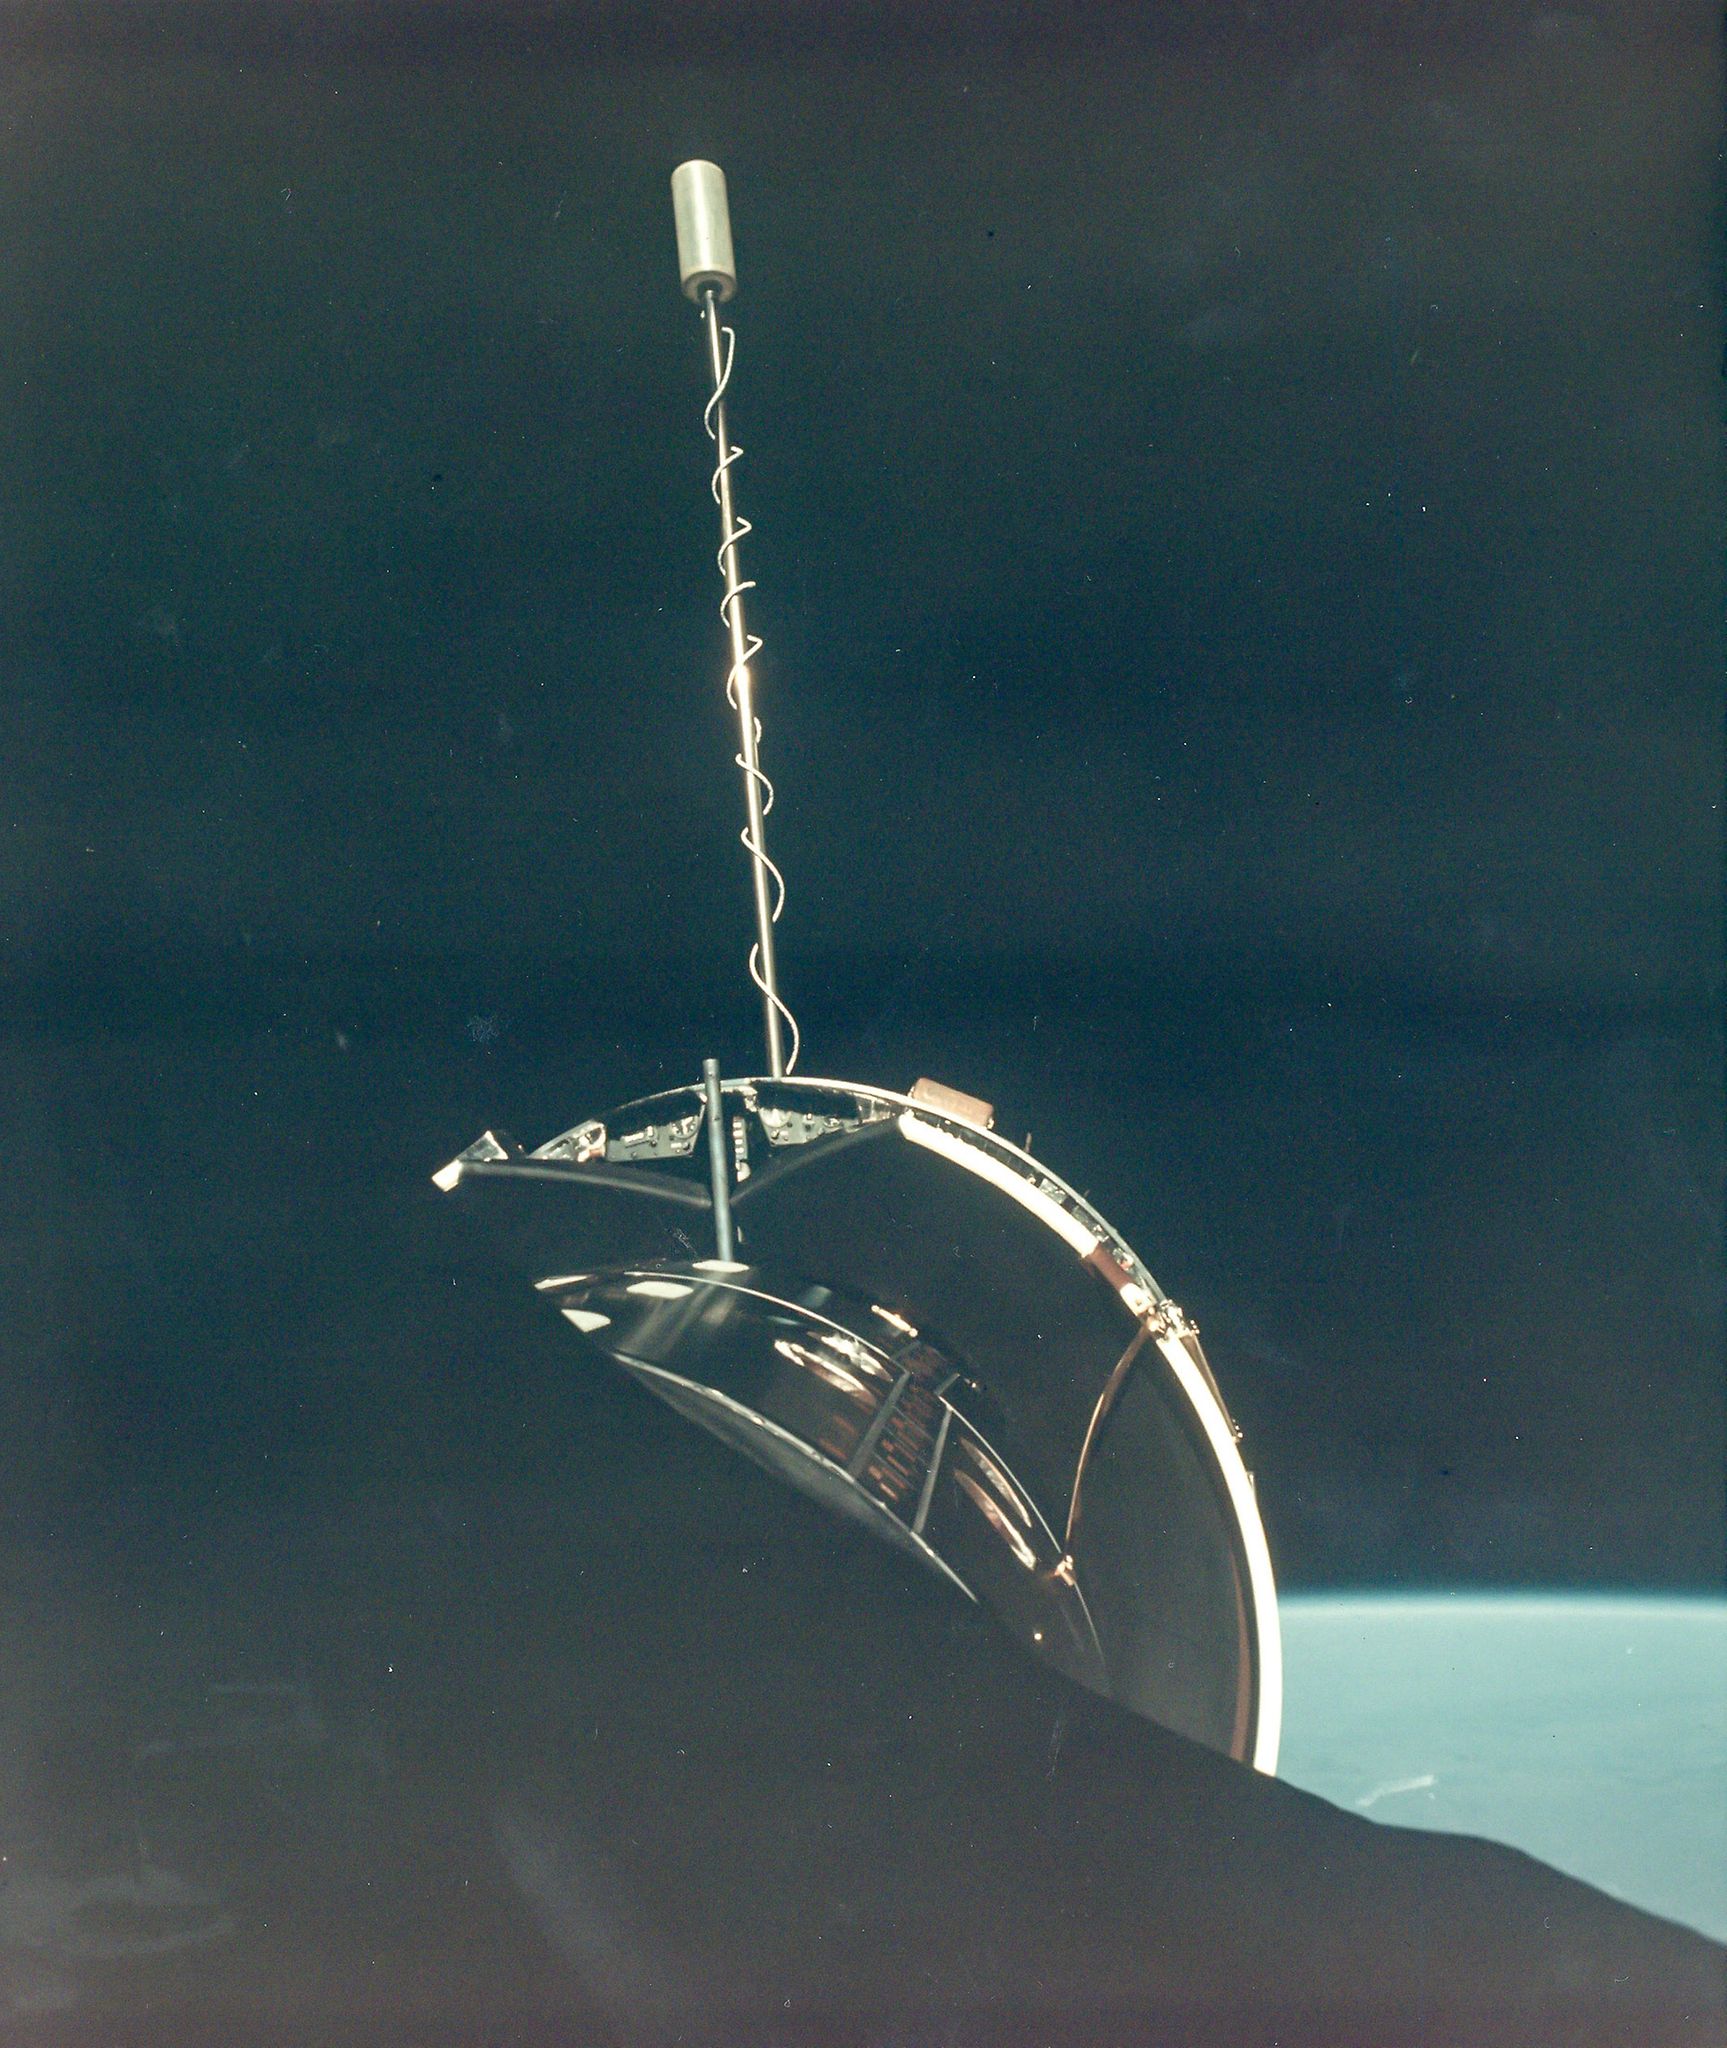 Michael Collins - Gemini 10 spacecraft docked with the Agena, July 1966 Vintage chromogenic print on